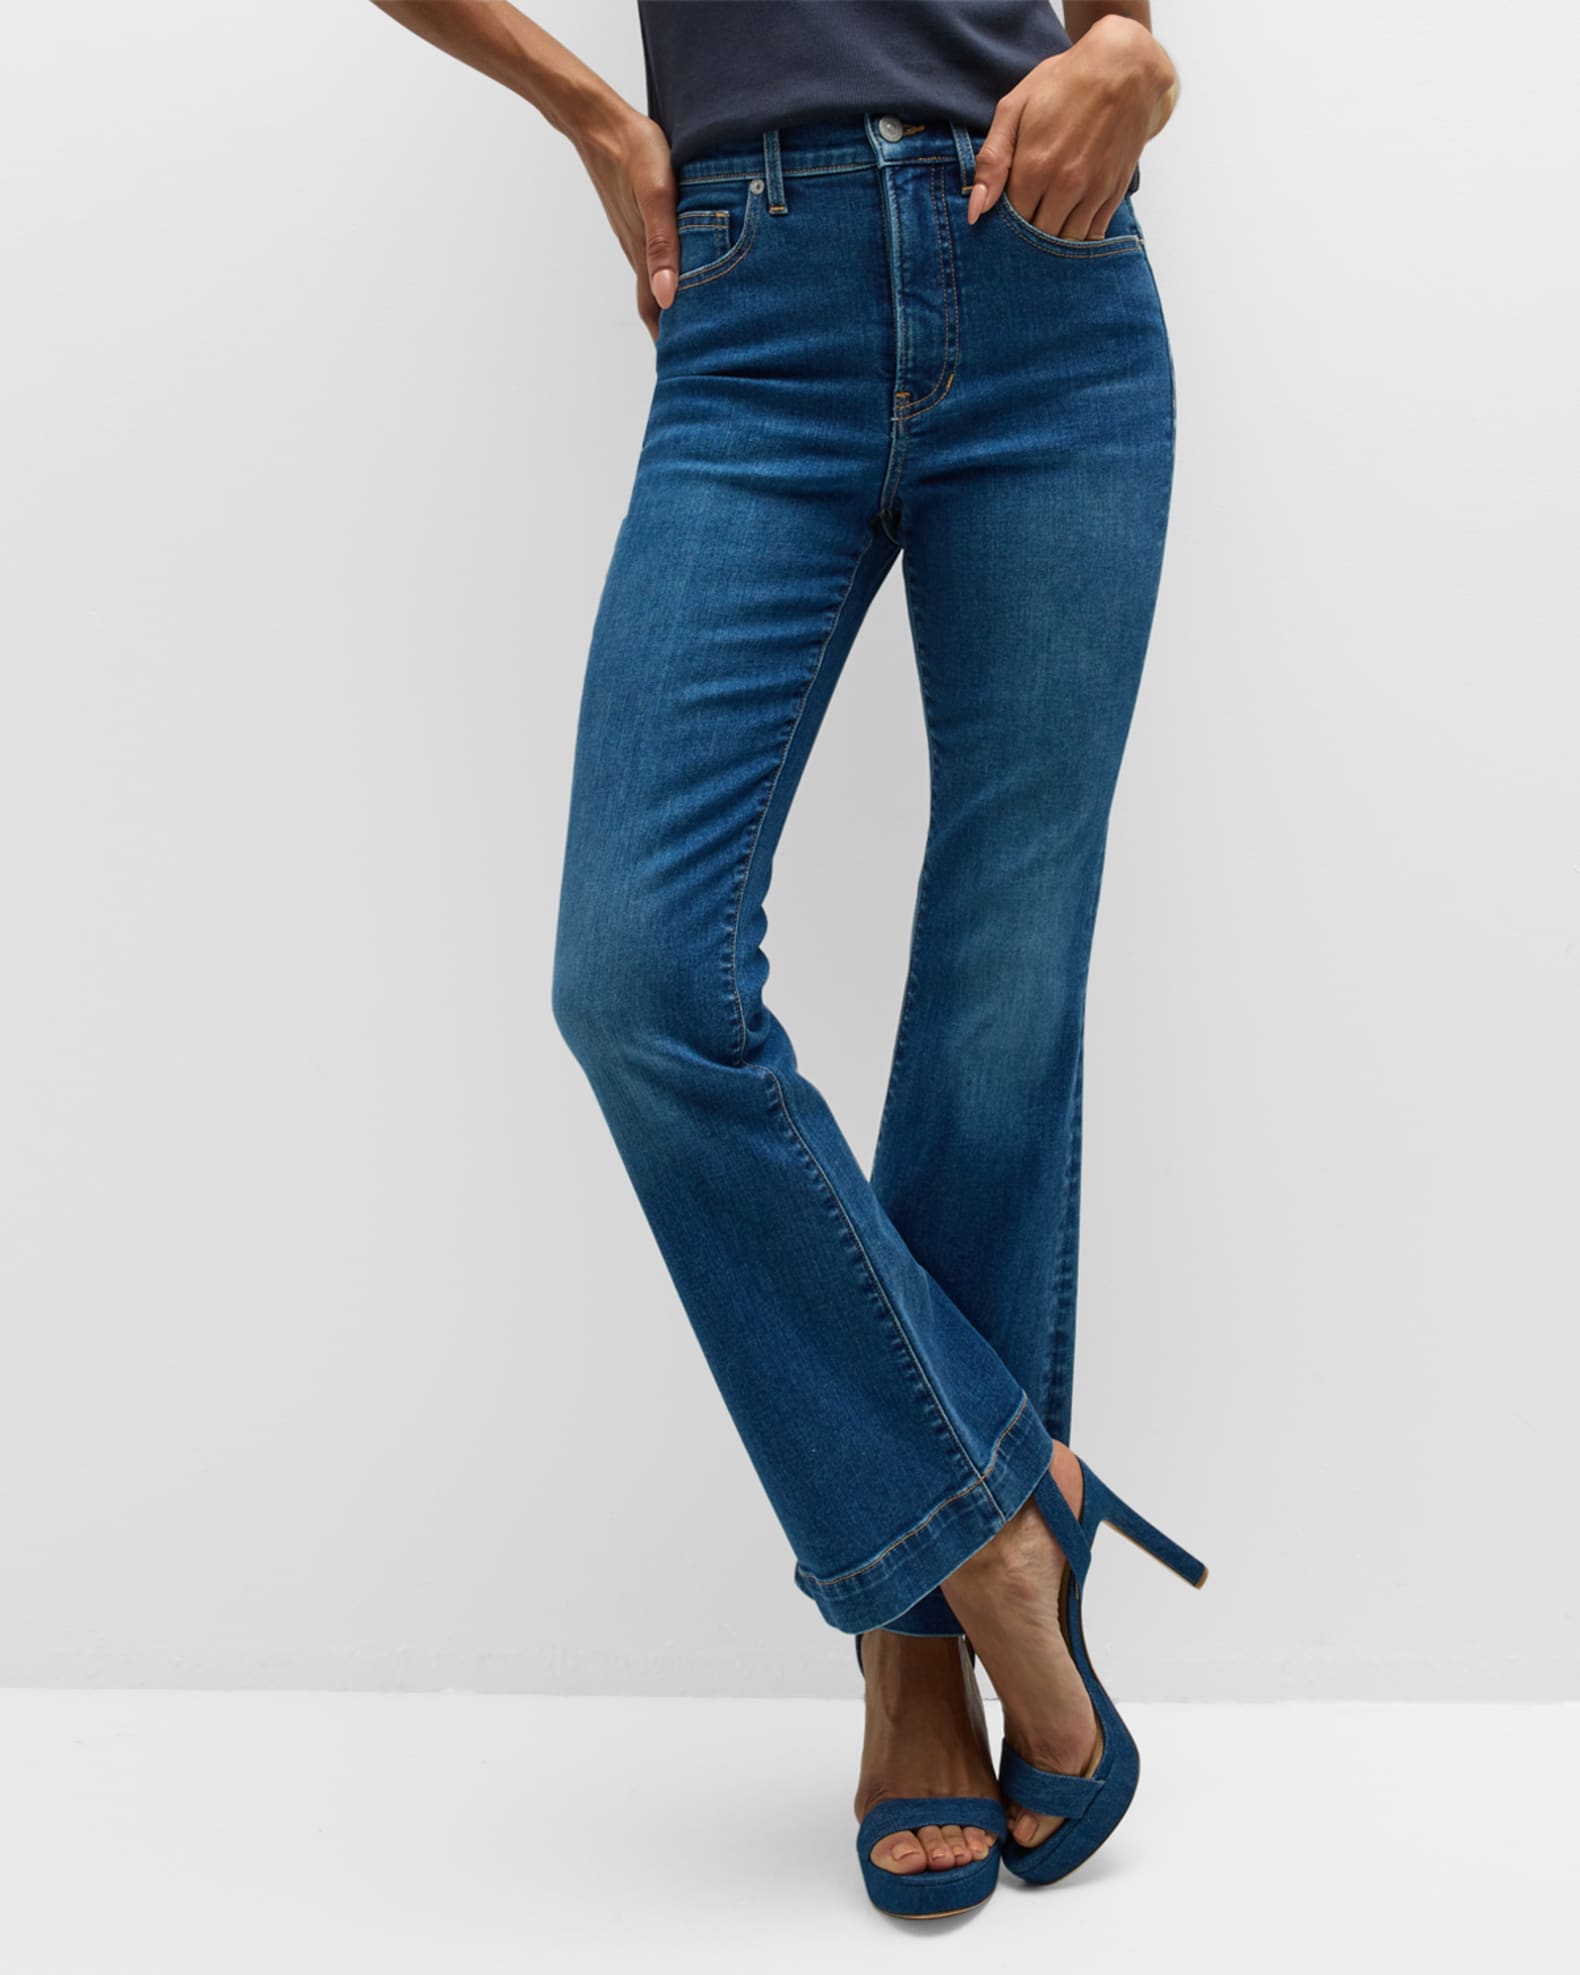 Veronica Beard Jeans Carson Ankle Flare Jeans | Neiman Marcus